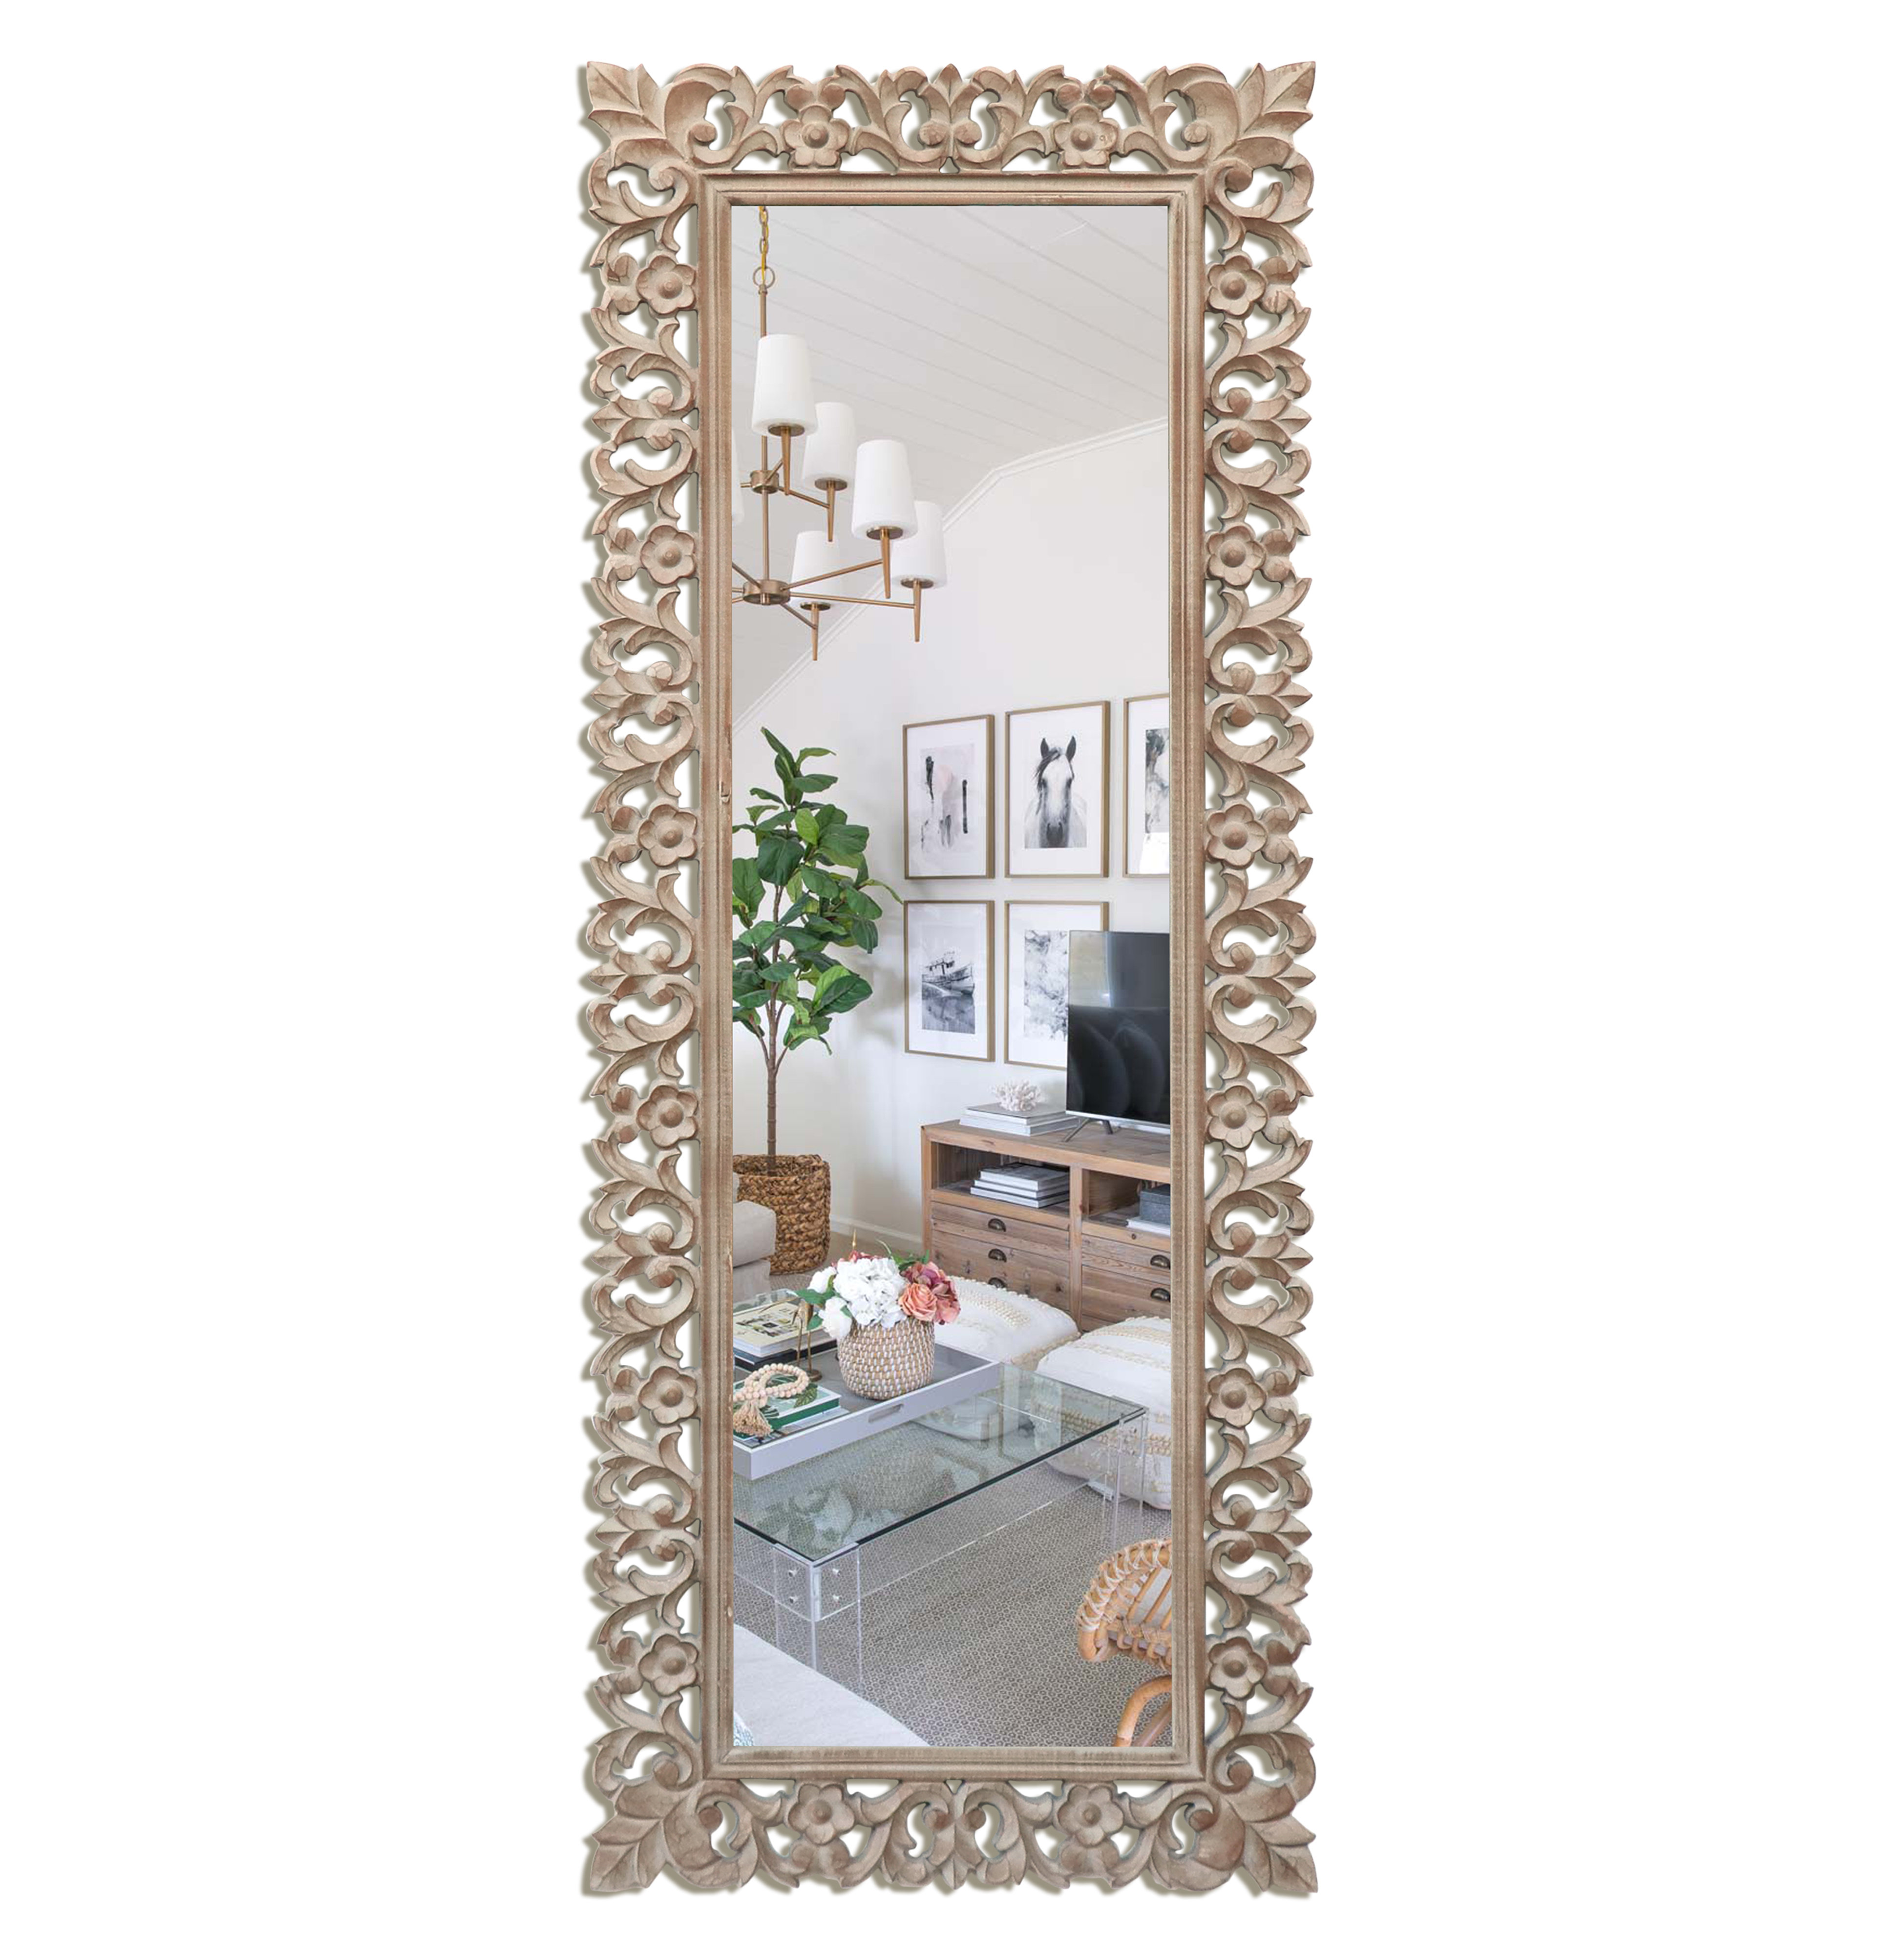 Why Mirrored Walls are an Asset